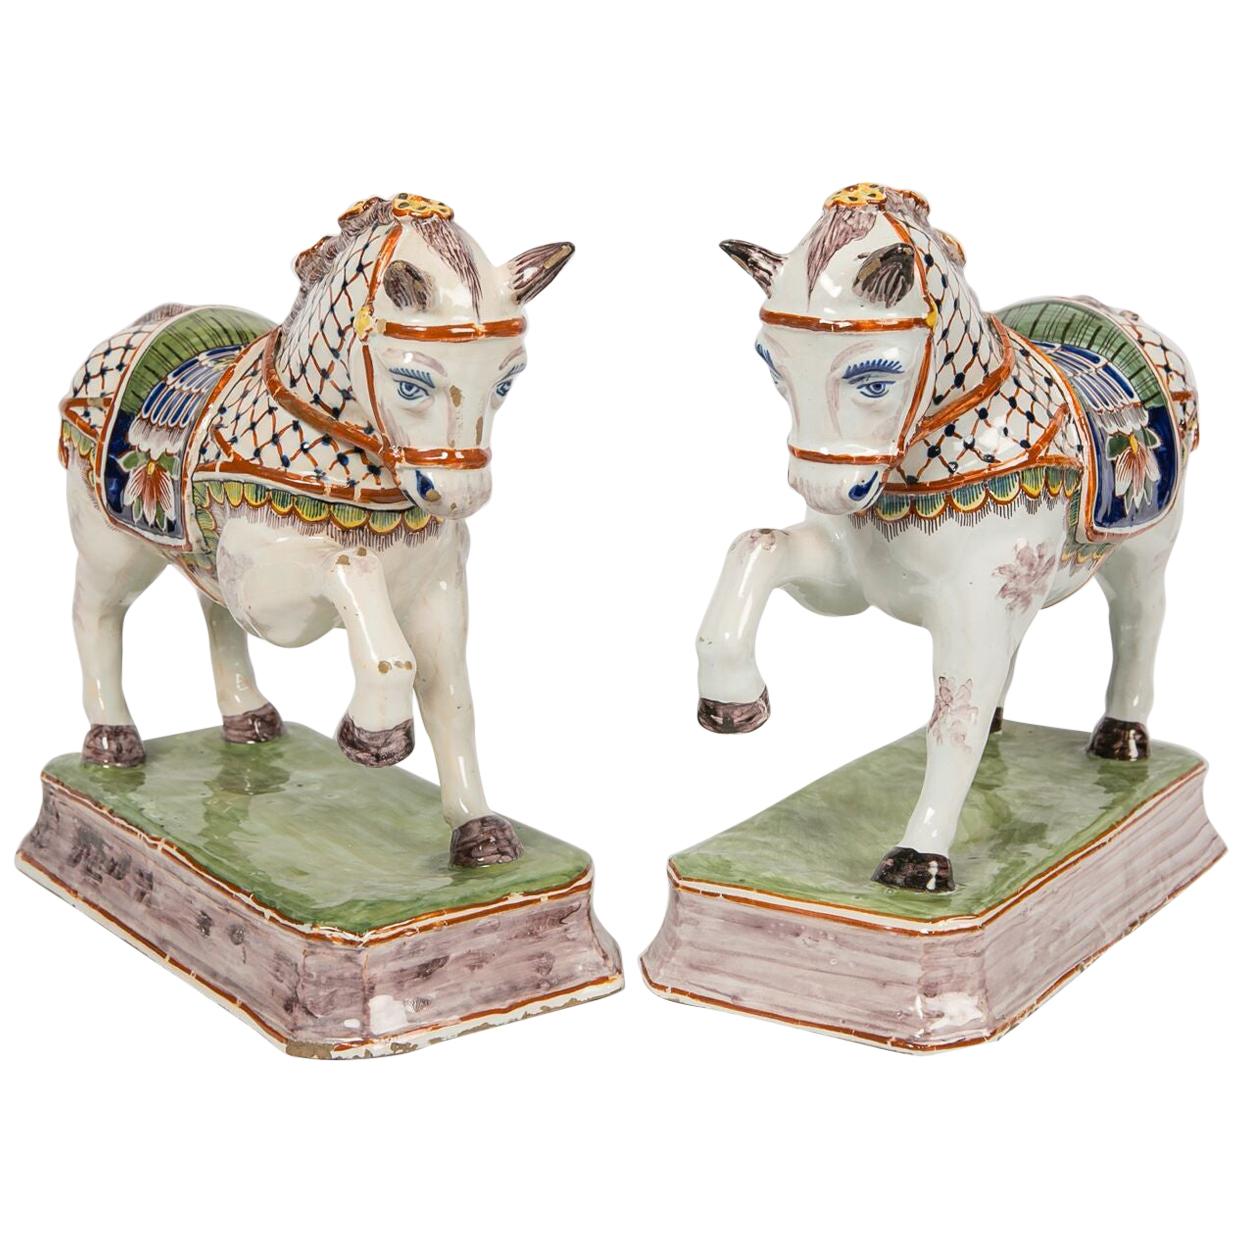 Pair of Dutch Delft Horses Painted in Polychrome Colors Made, Mid-19th Century